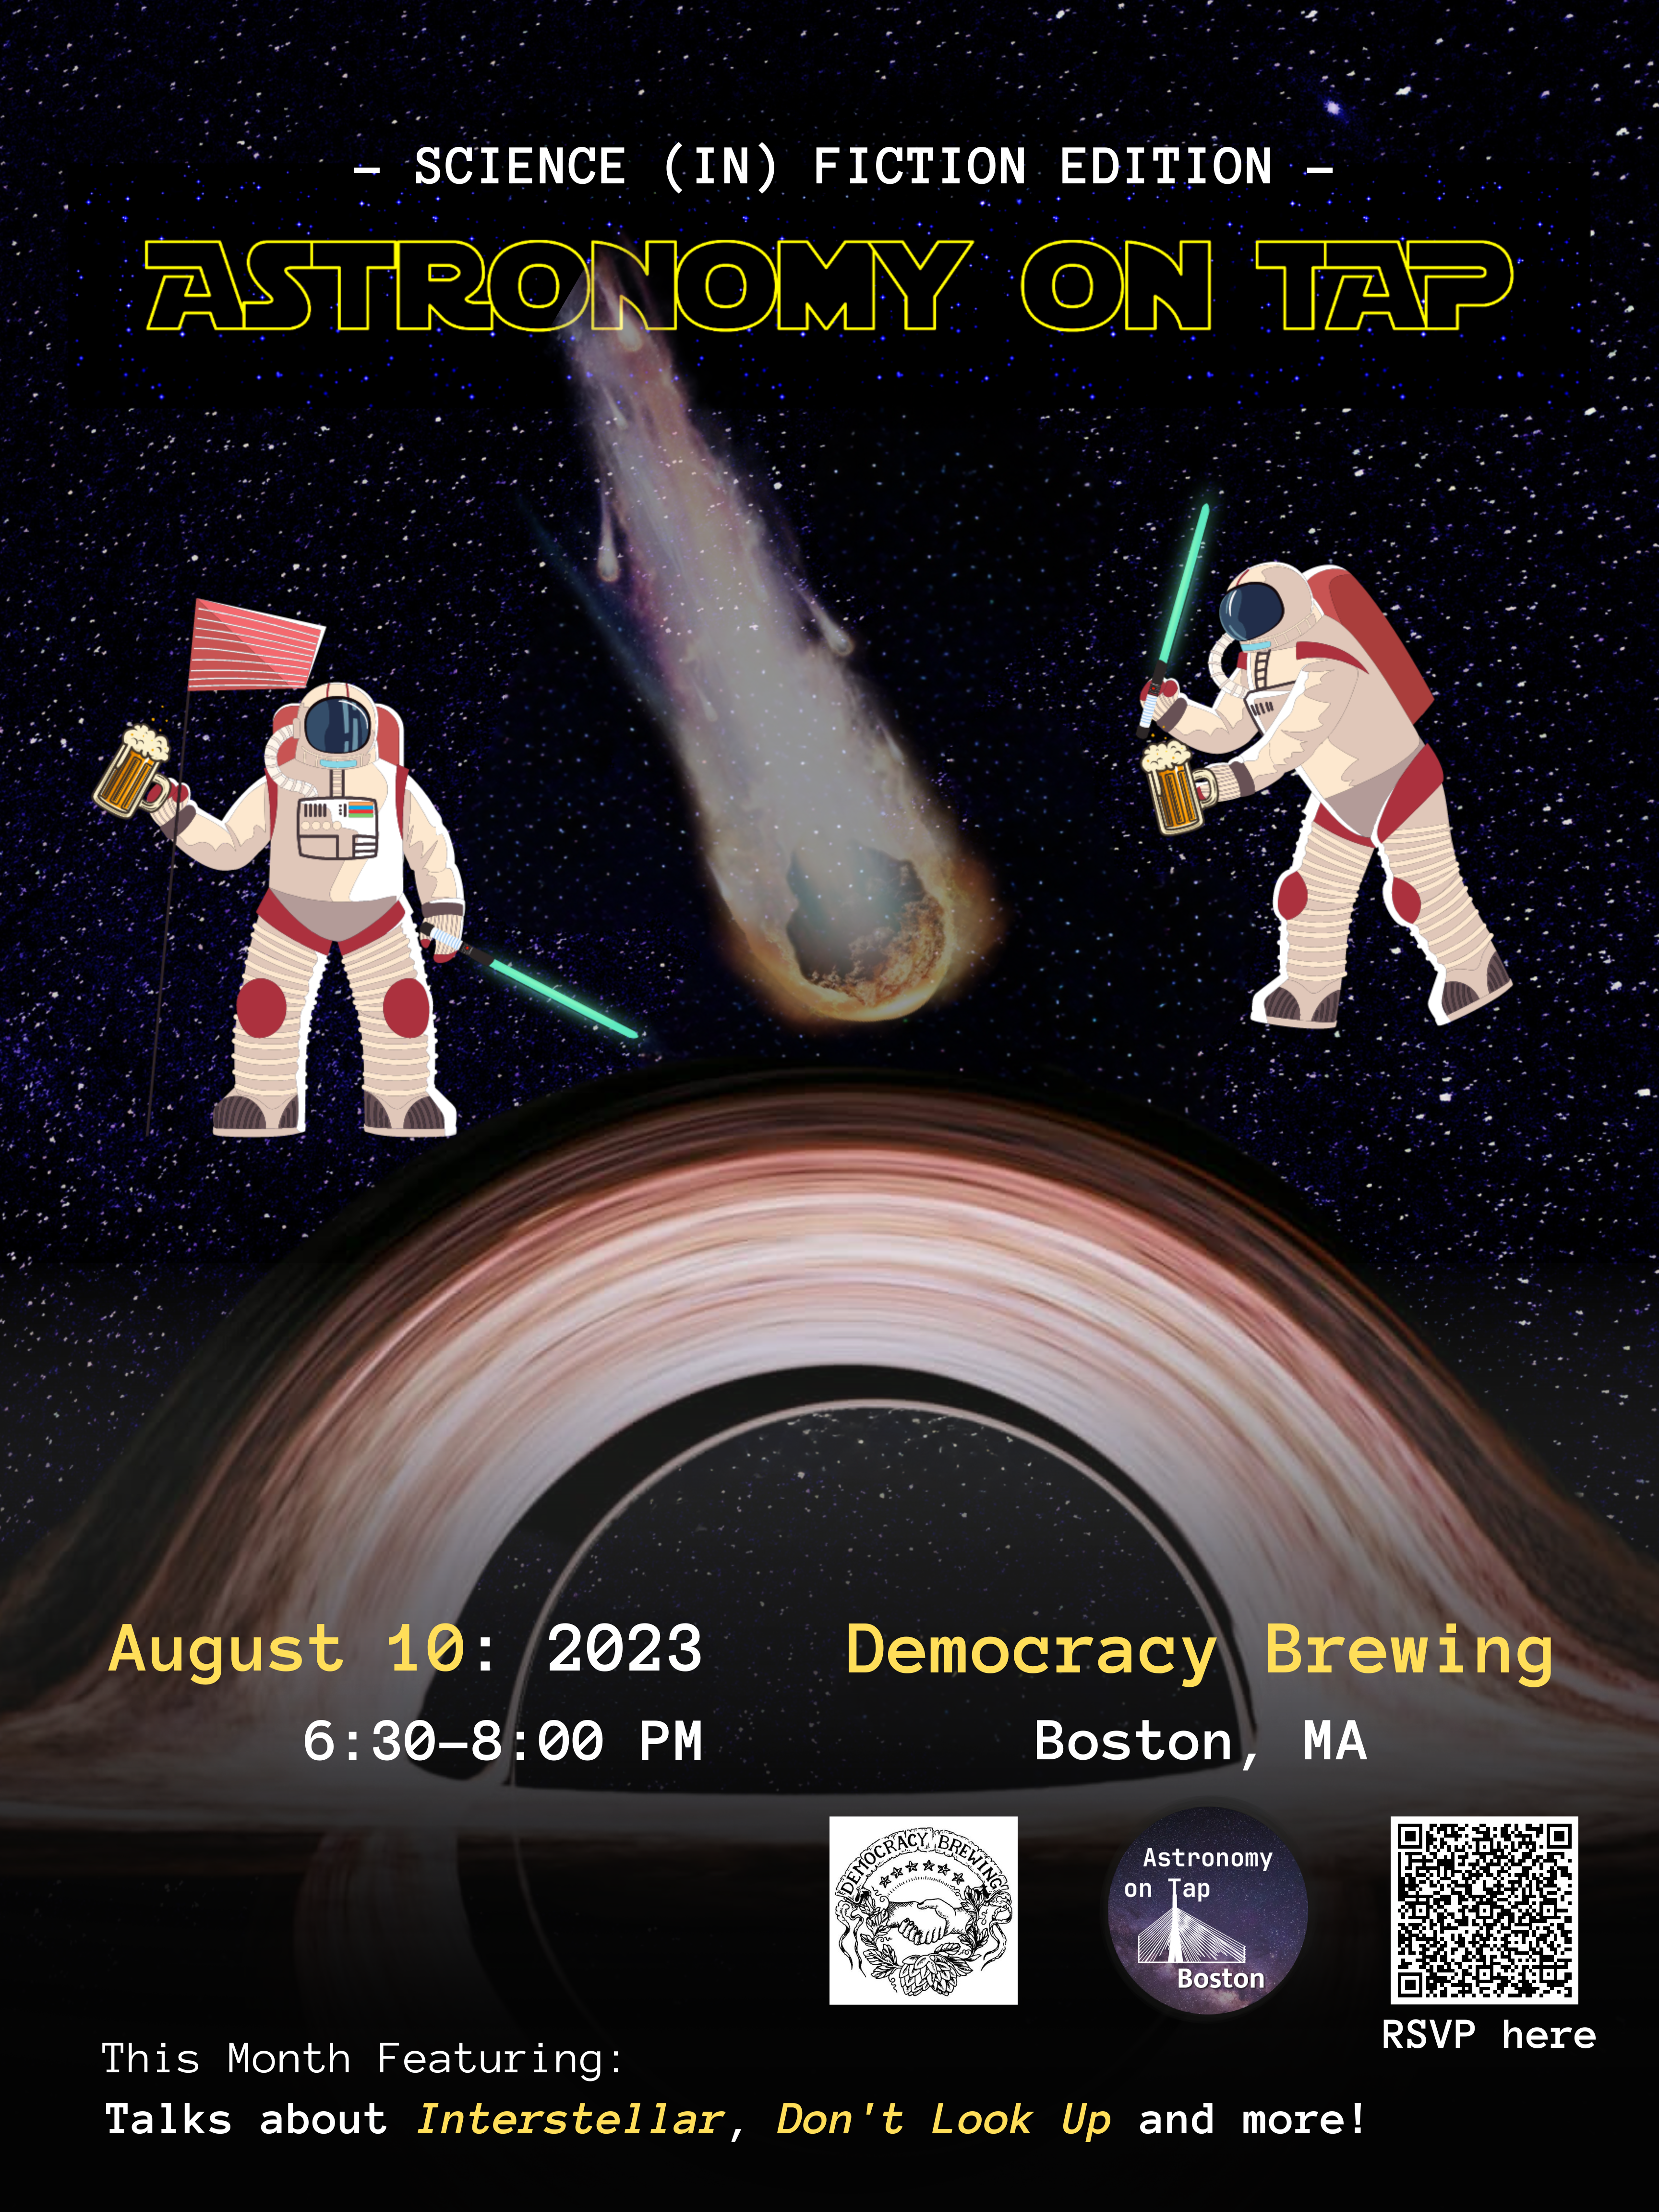 Astronomy on Tap Boston poster with a background of stars, a black hole, and an asteroid. Two astronauts holding lightsabers and beers are depicted. The poster reads "Science (in) Fiction Edition, Astronomy on Tap, August 10: 2023, 6:30 - 8:00 PM, Democracy Brewing, Boston, MA. This month featuring talks about Interstellar, Don't Look Up, and more!"